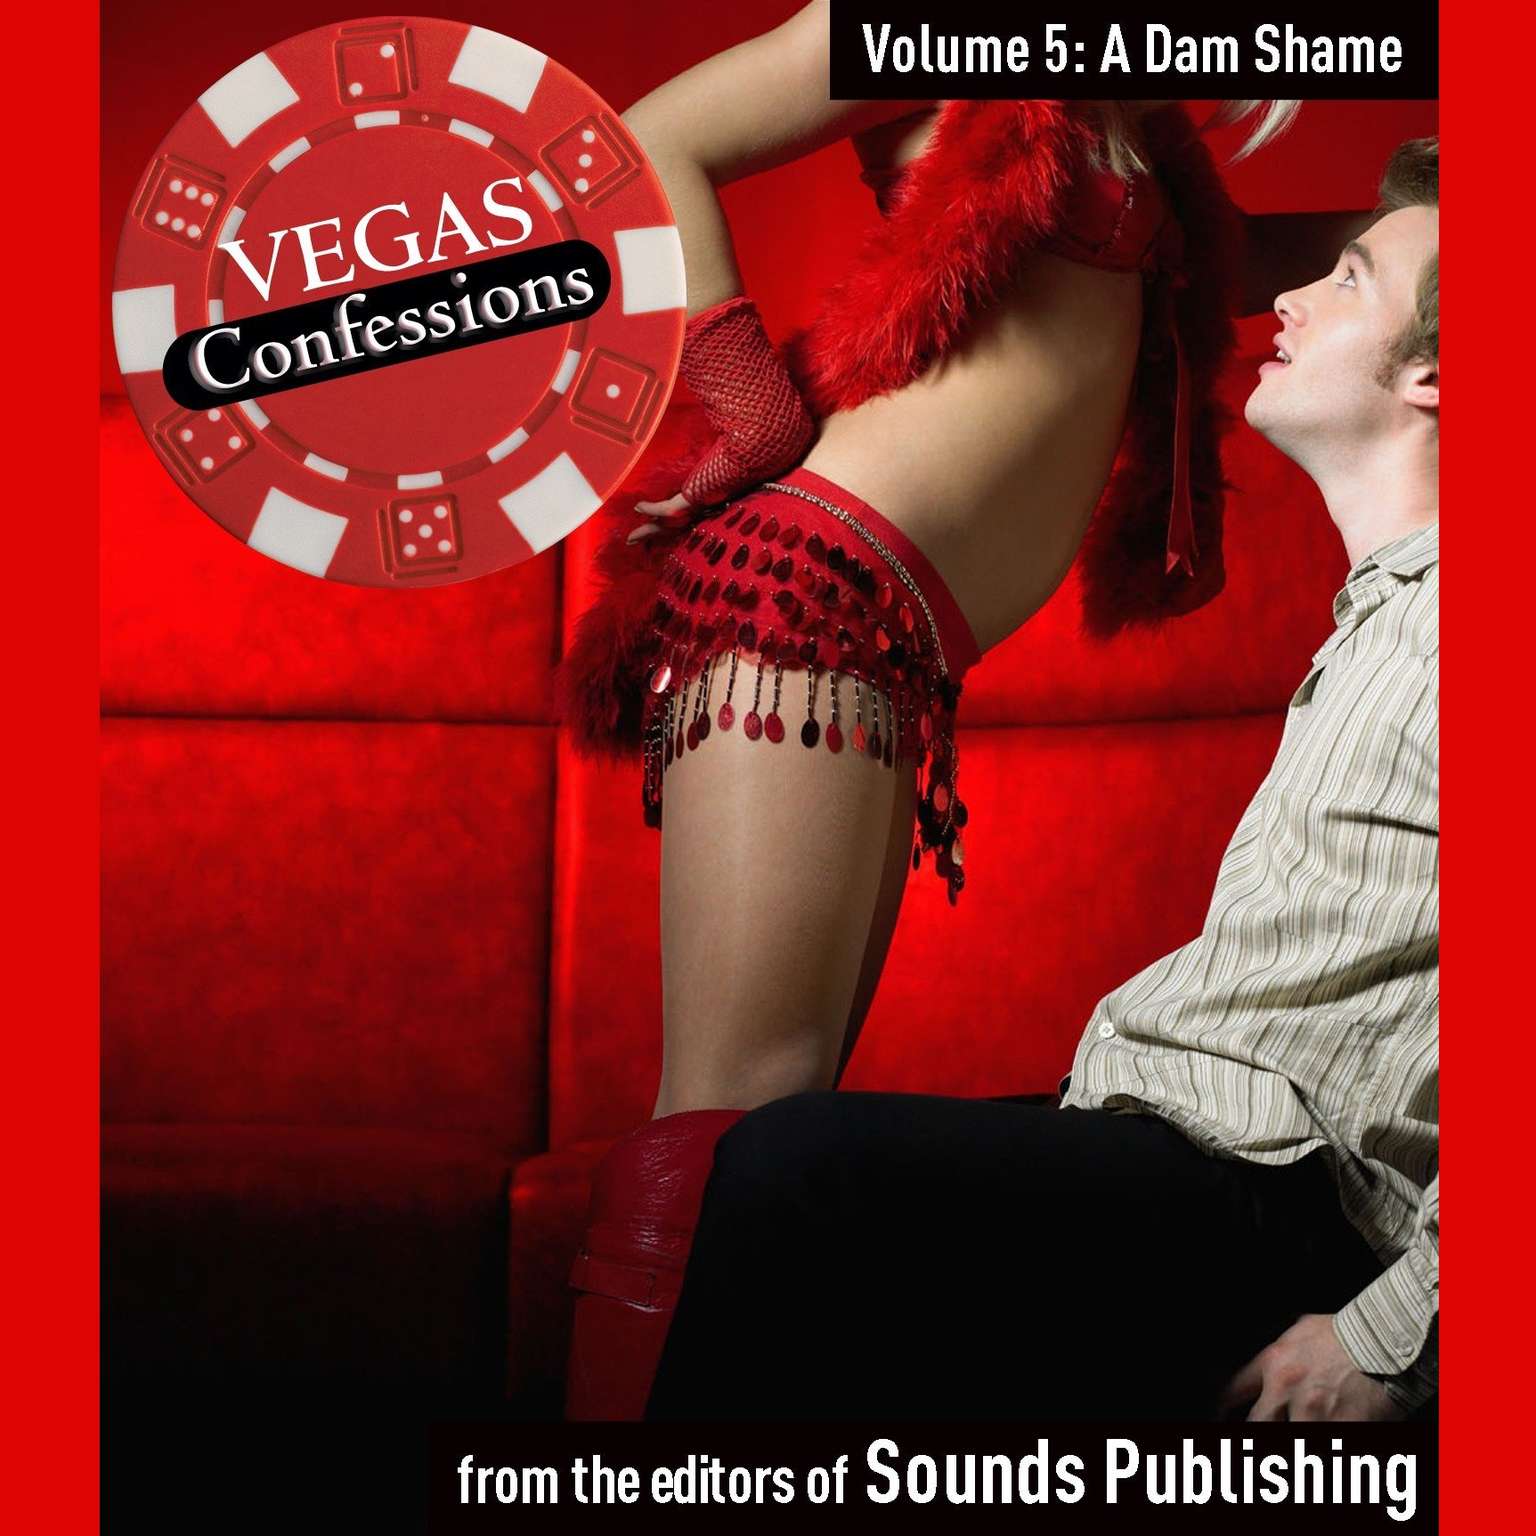 Vegas Confessions 5: A Dam Shame Audiobook, by The Editors of Sounds Publishing